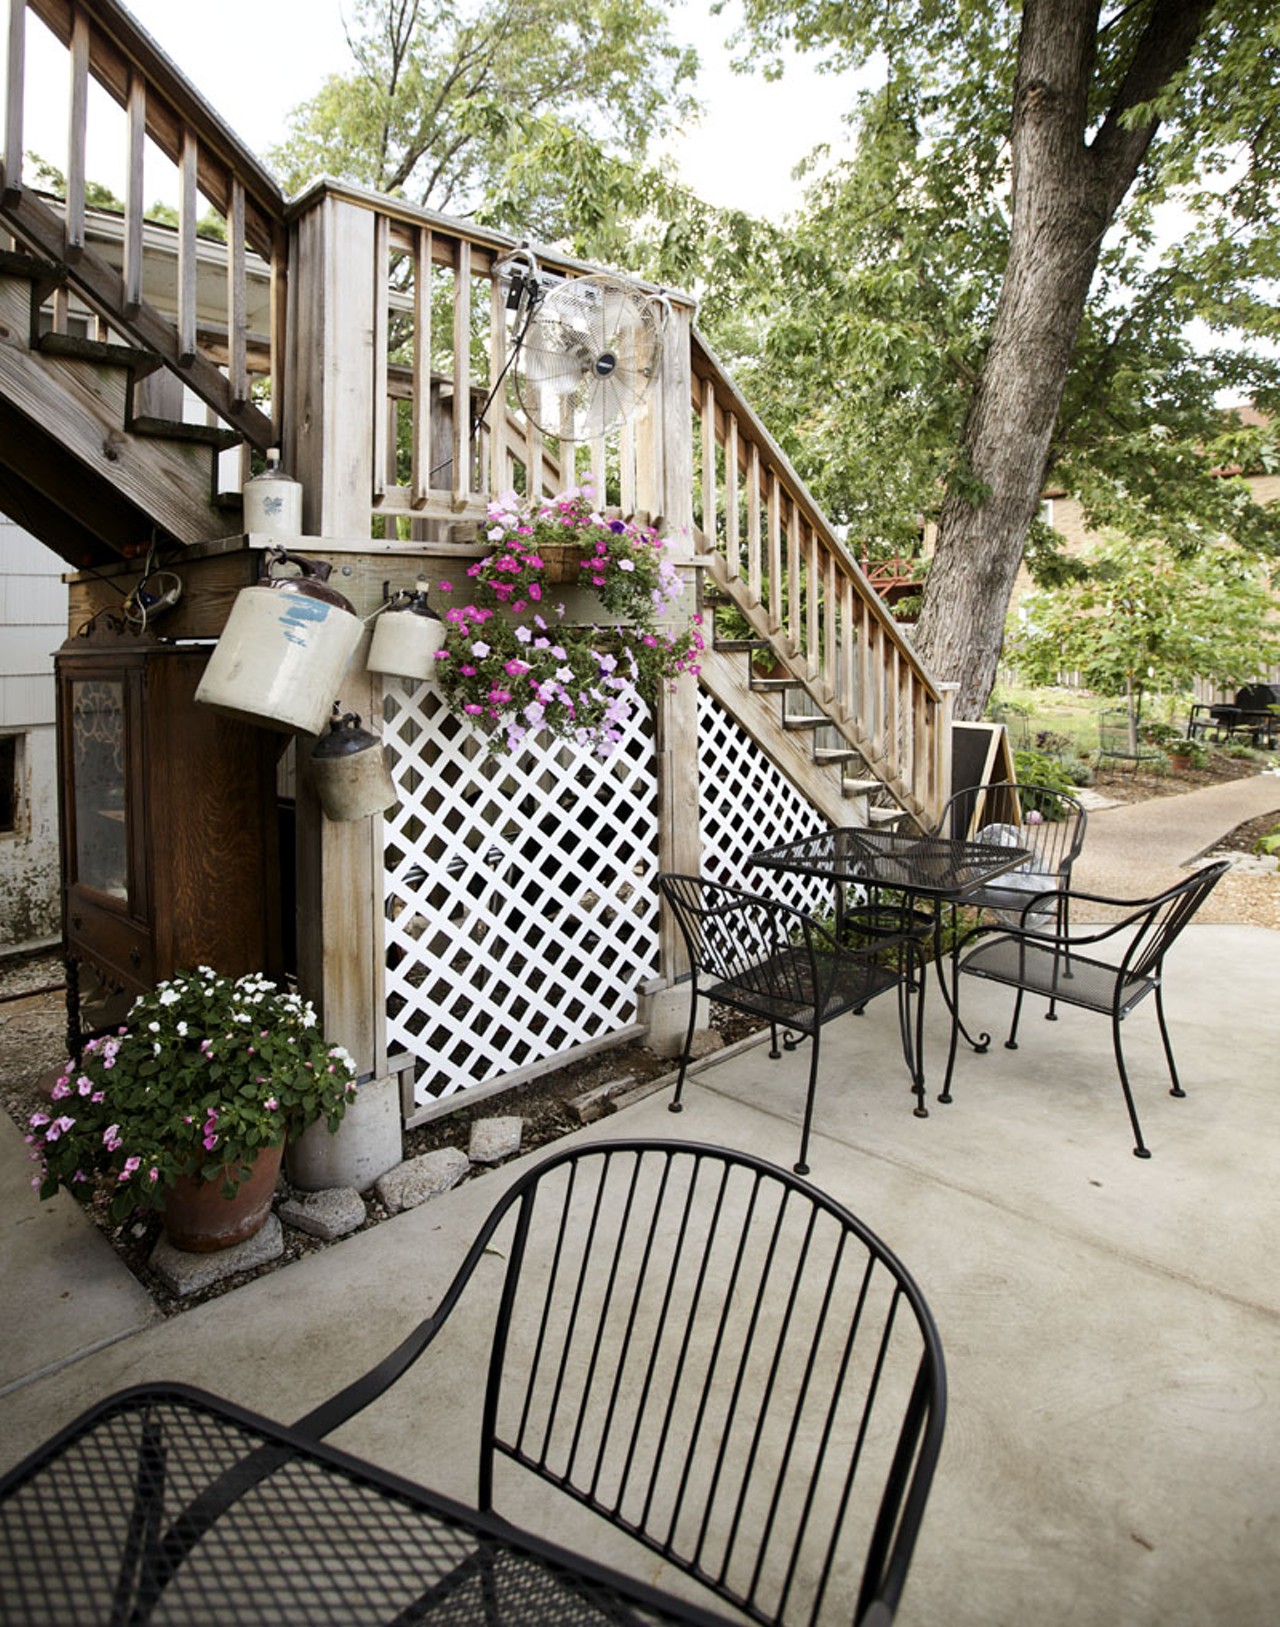 Outdoor seating on the back patio is available.